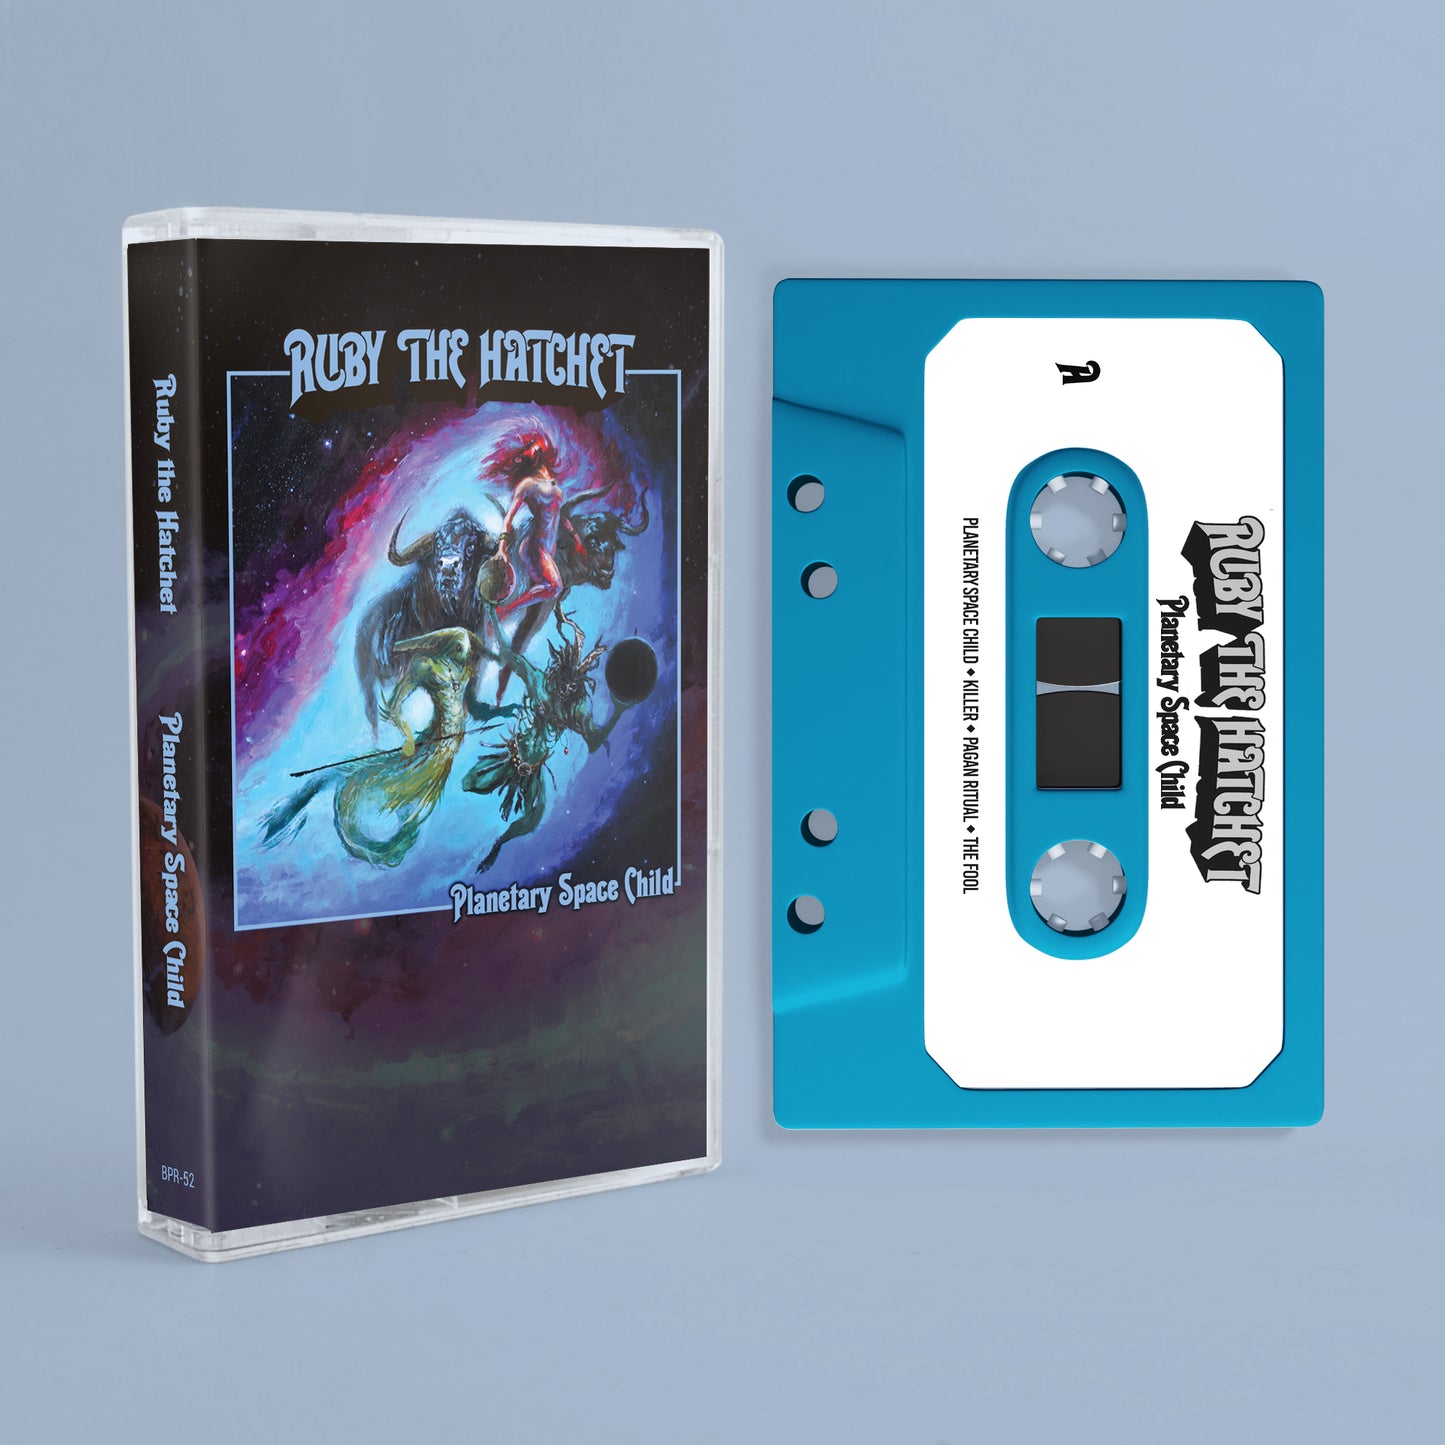 Ruby The Hatchet - Planetary Space Child Cassette Tape